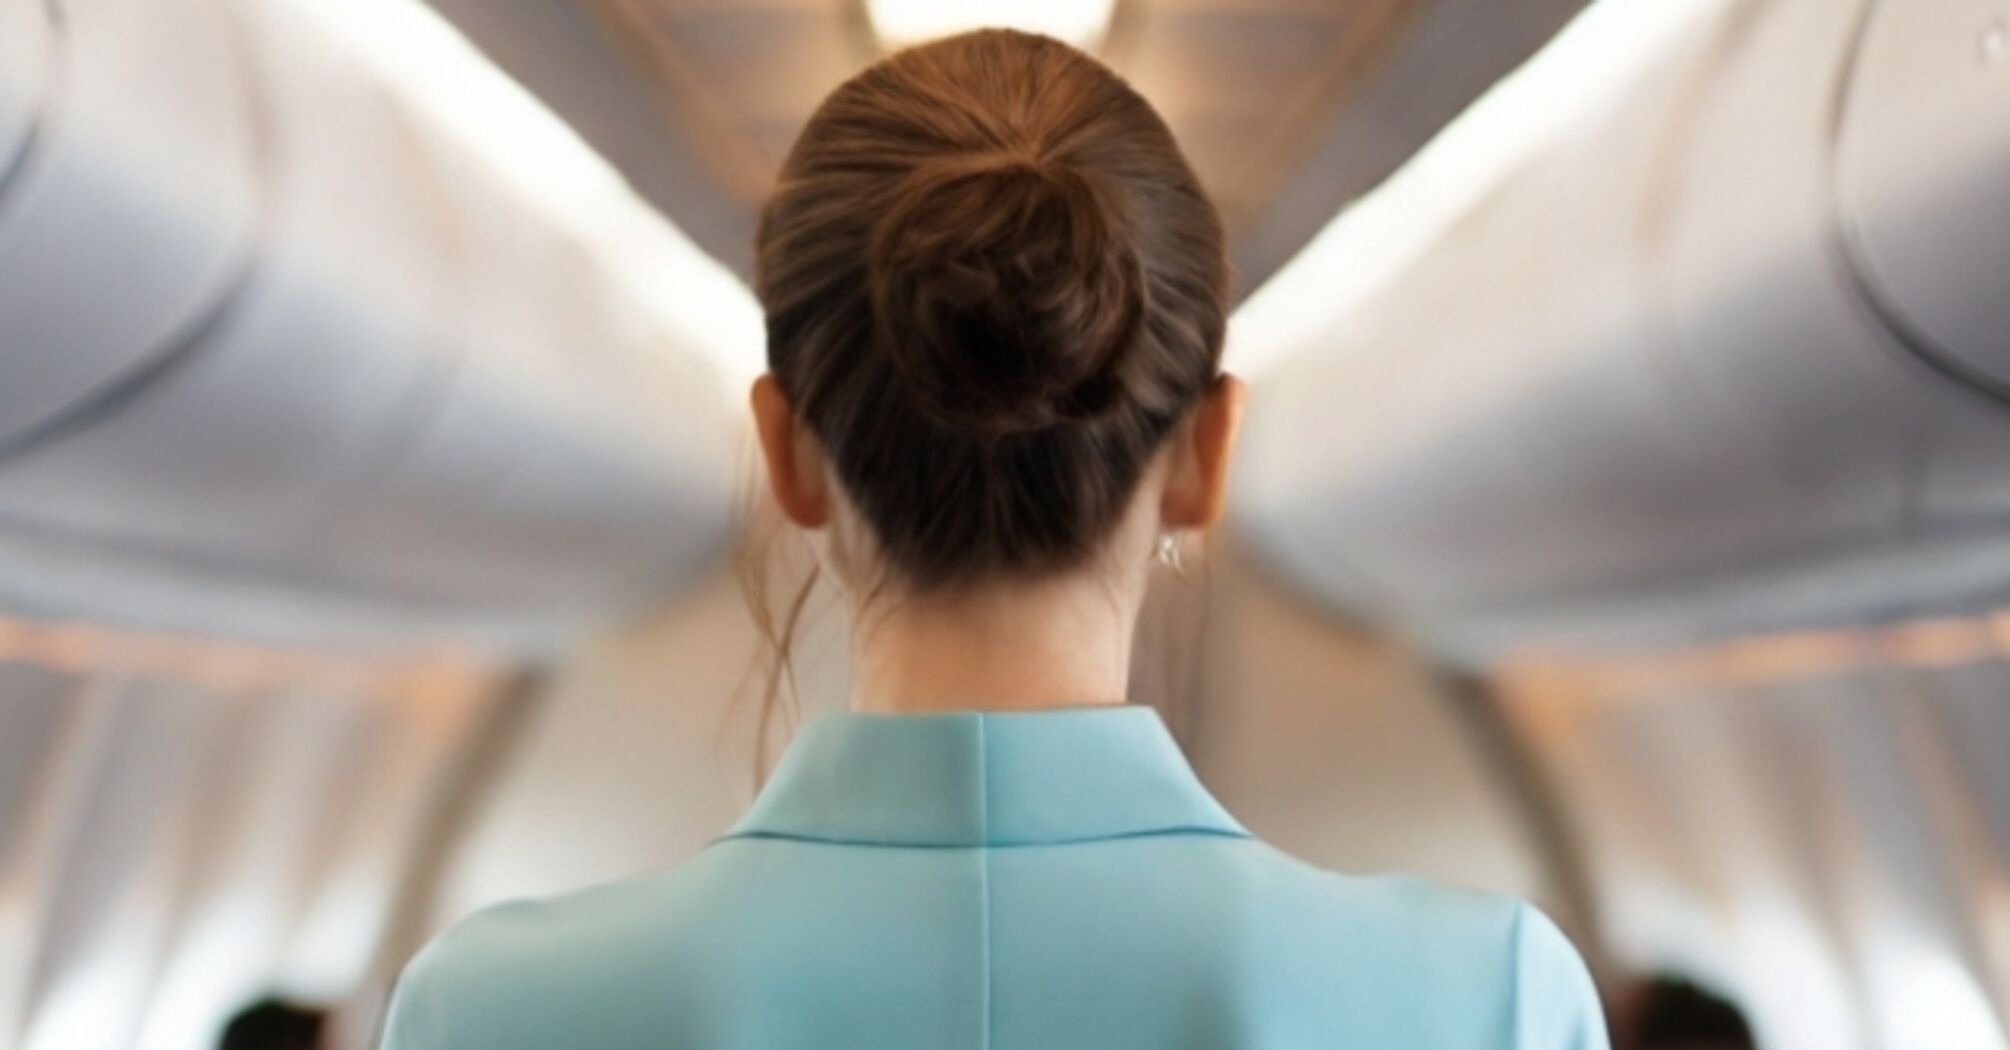 A flight attendant gave advice on how to please the crew during a flight and shared which passengers she finds unbearable